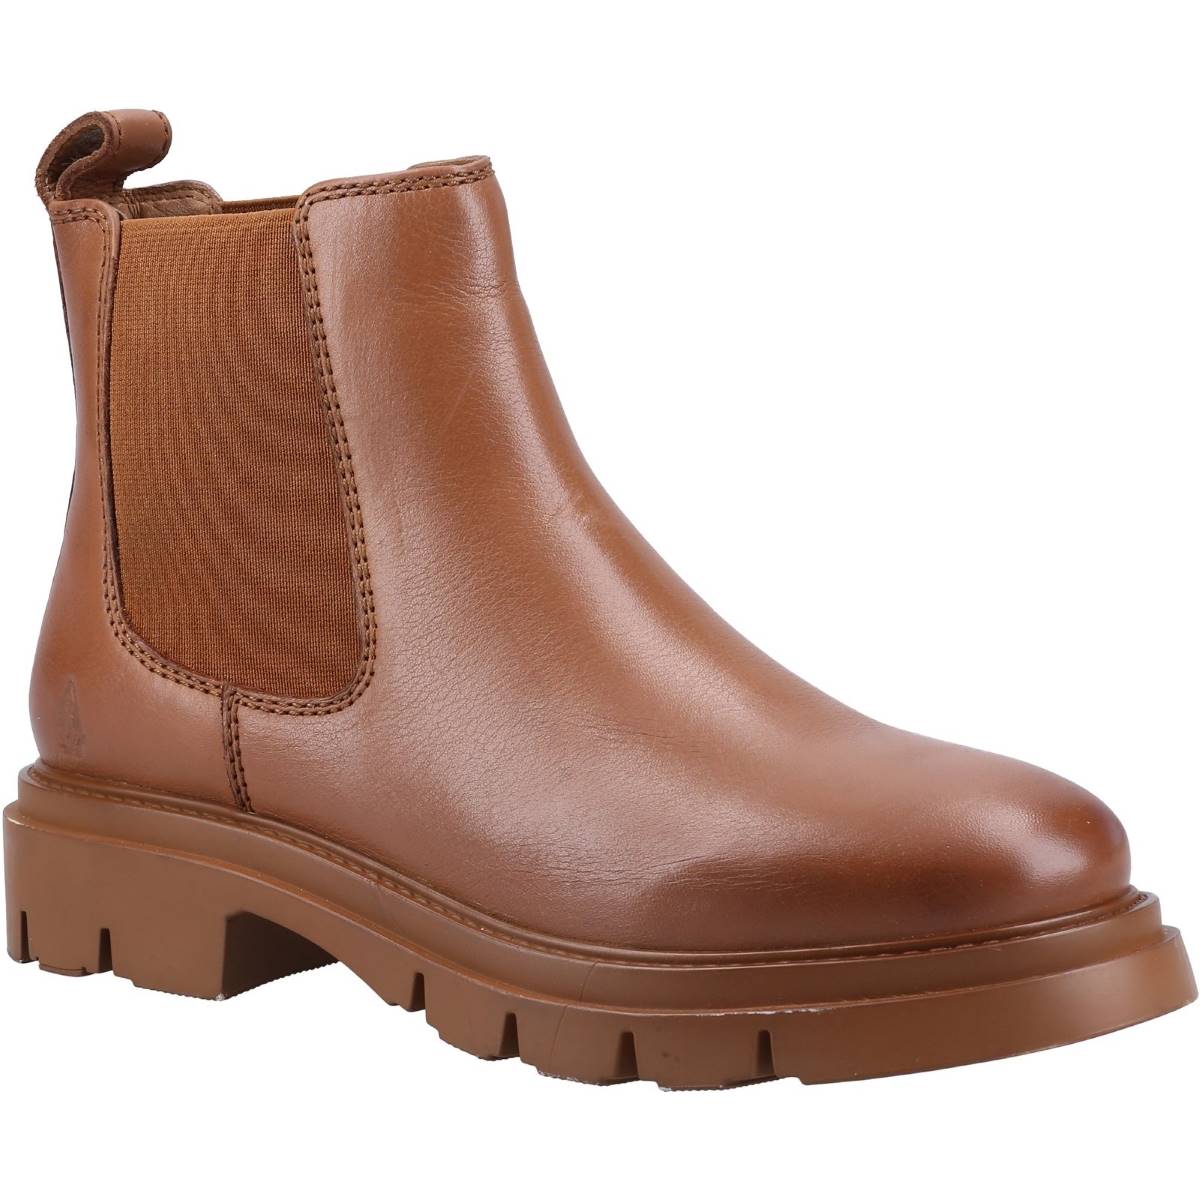 Hush Puppies Raya Chelsea Tan Womens ankle boots HP-37851-70529 in a Plain Leather in Size 4